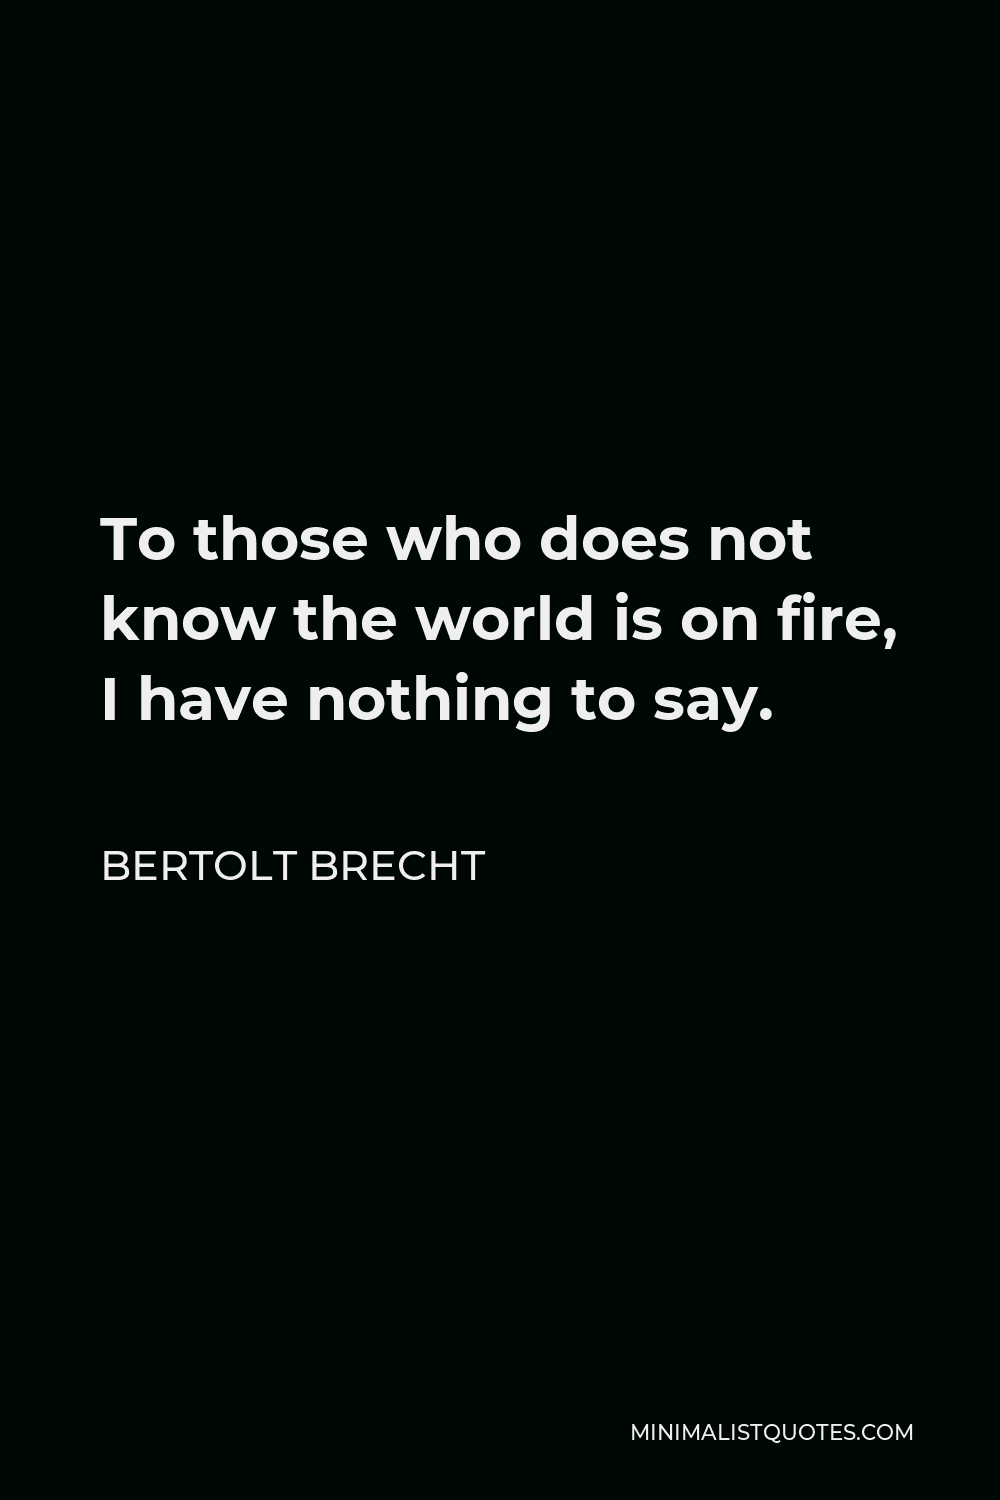 Bertolt Brecht Quote - To those who does not know the world is on fire, I have nothing to say.